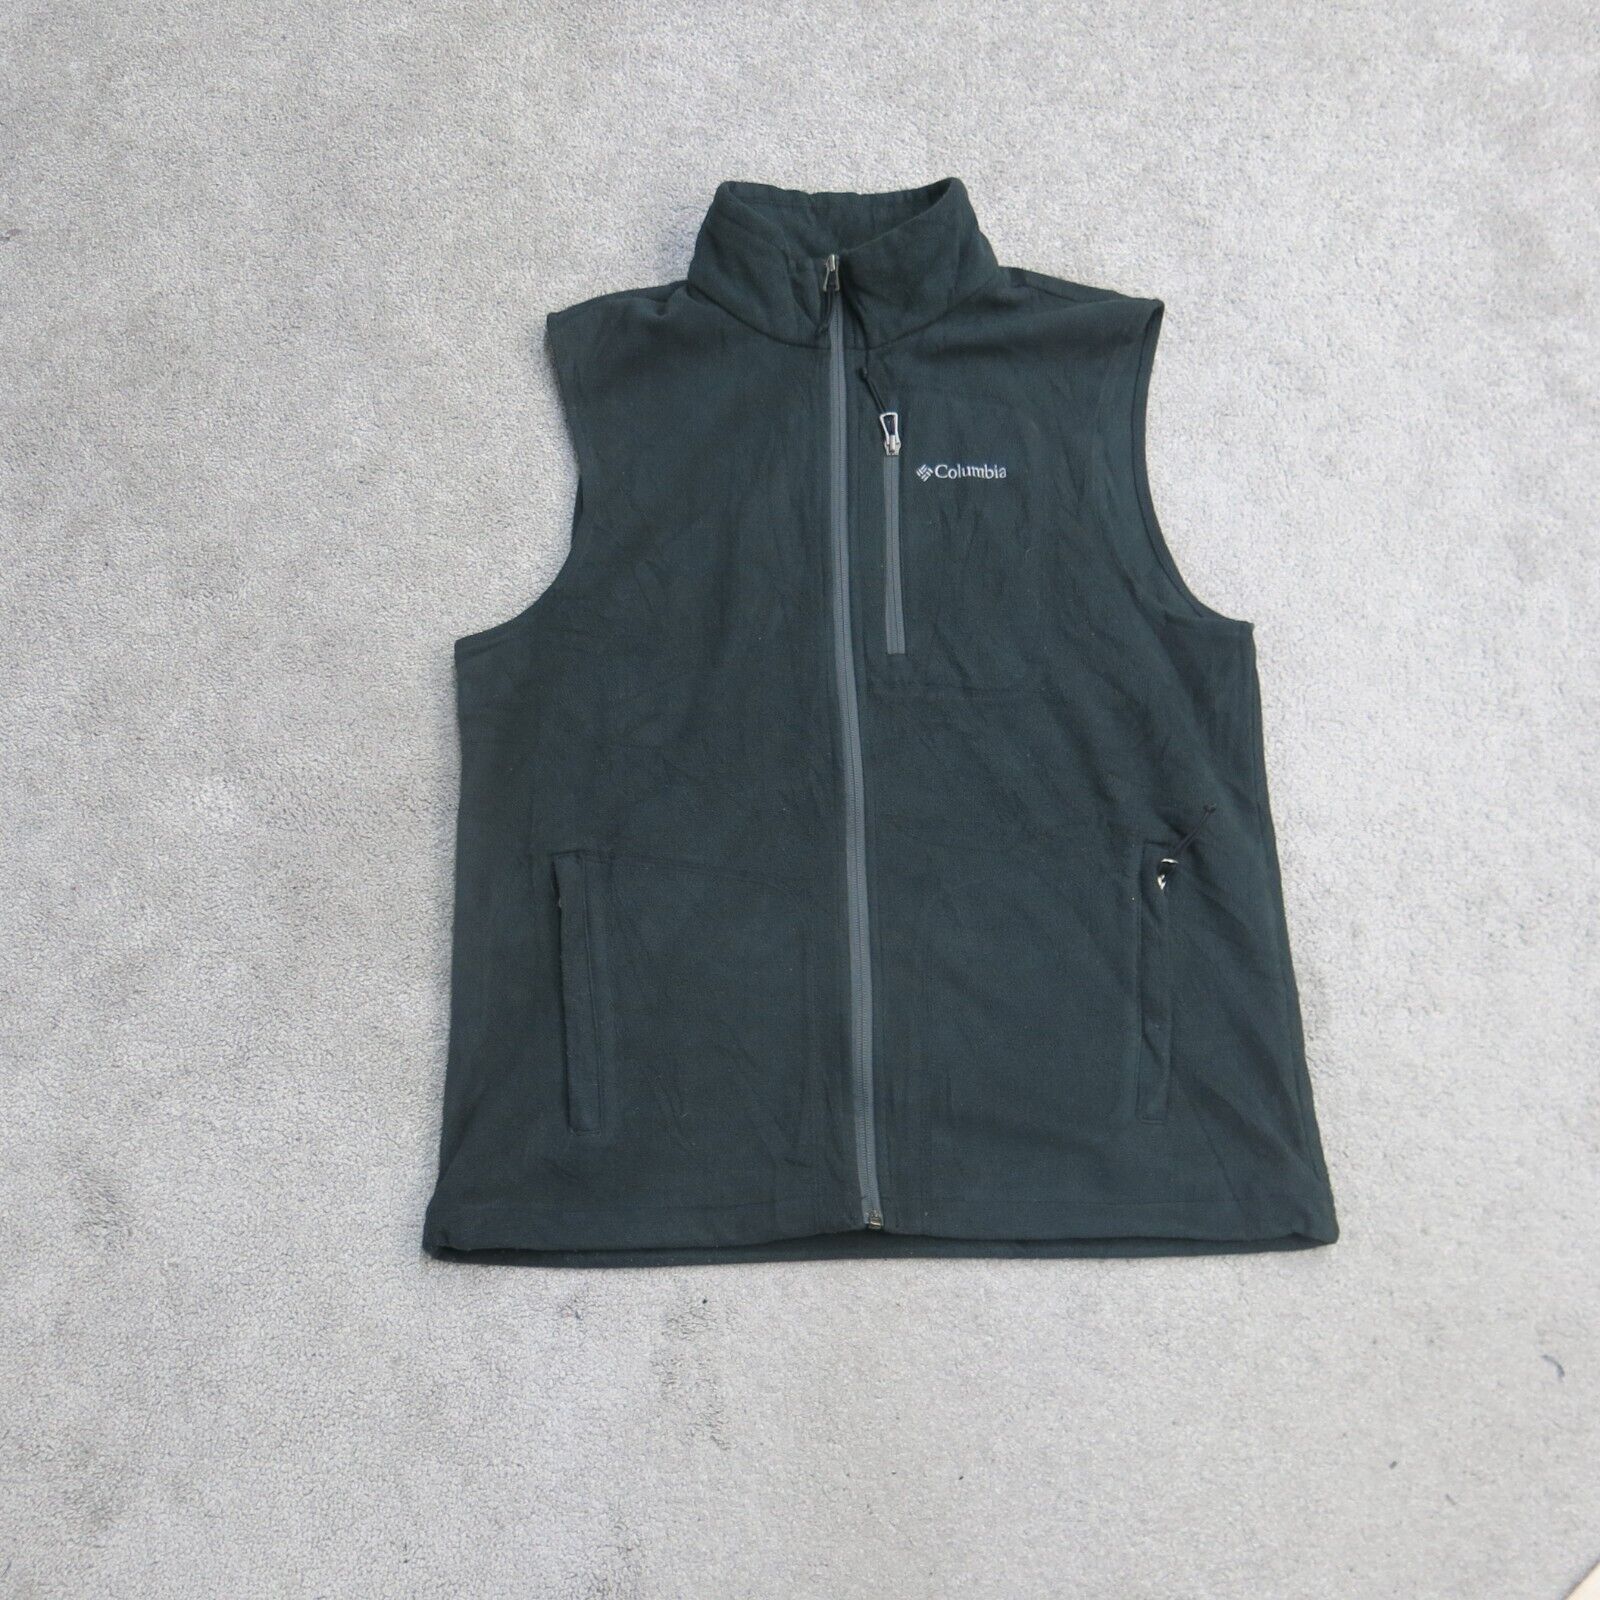 Buy Columbia Mens Green Color Polyester Fabric Sleeveless Powder Lite Vest  Jacket Online